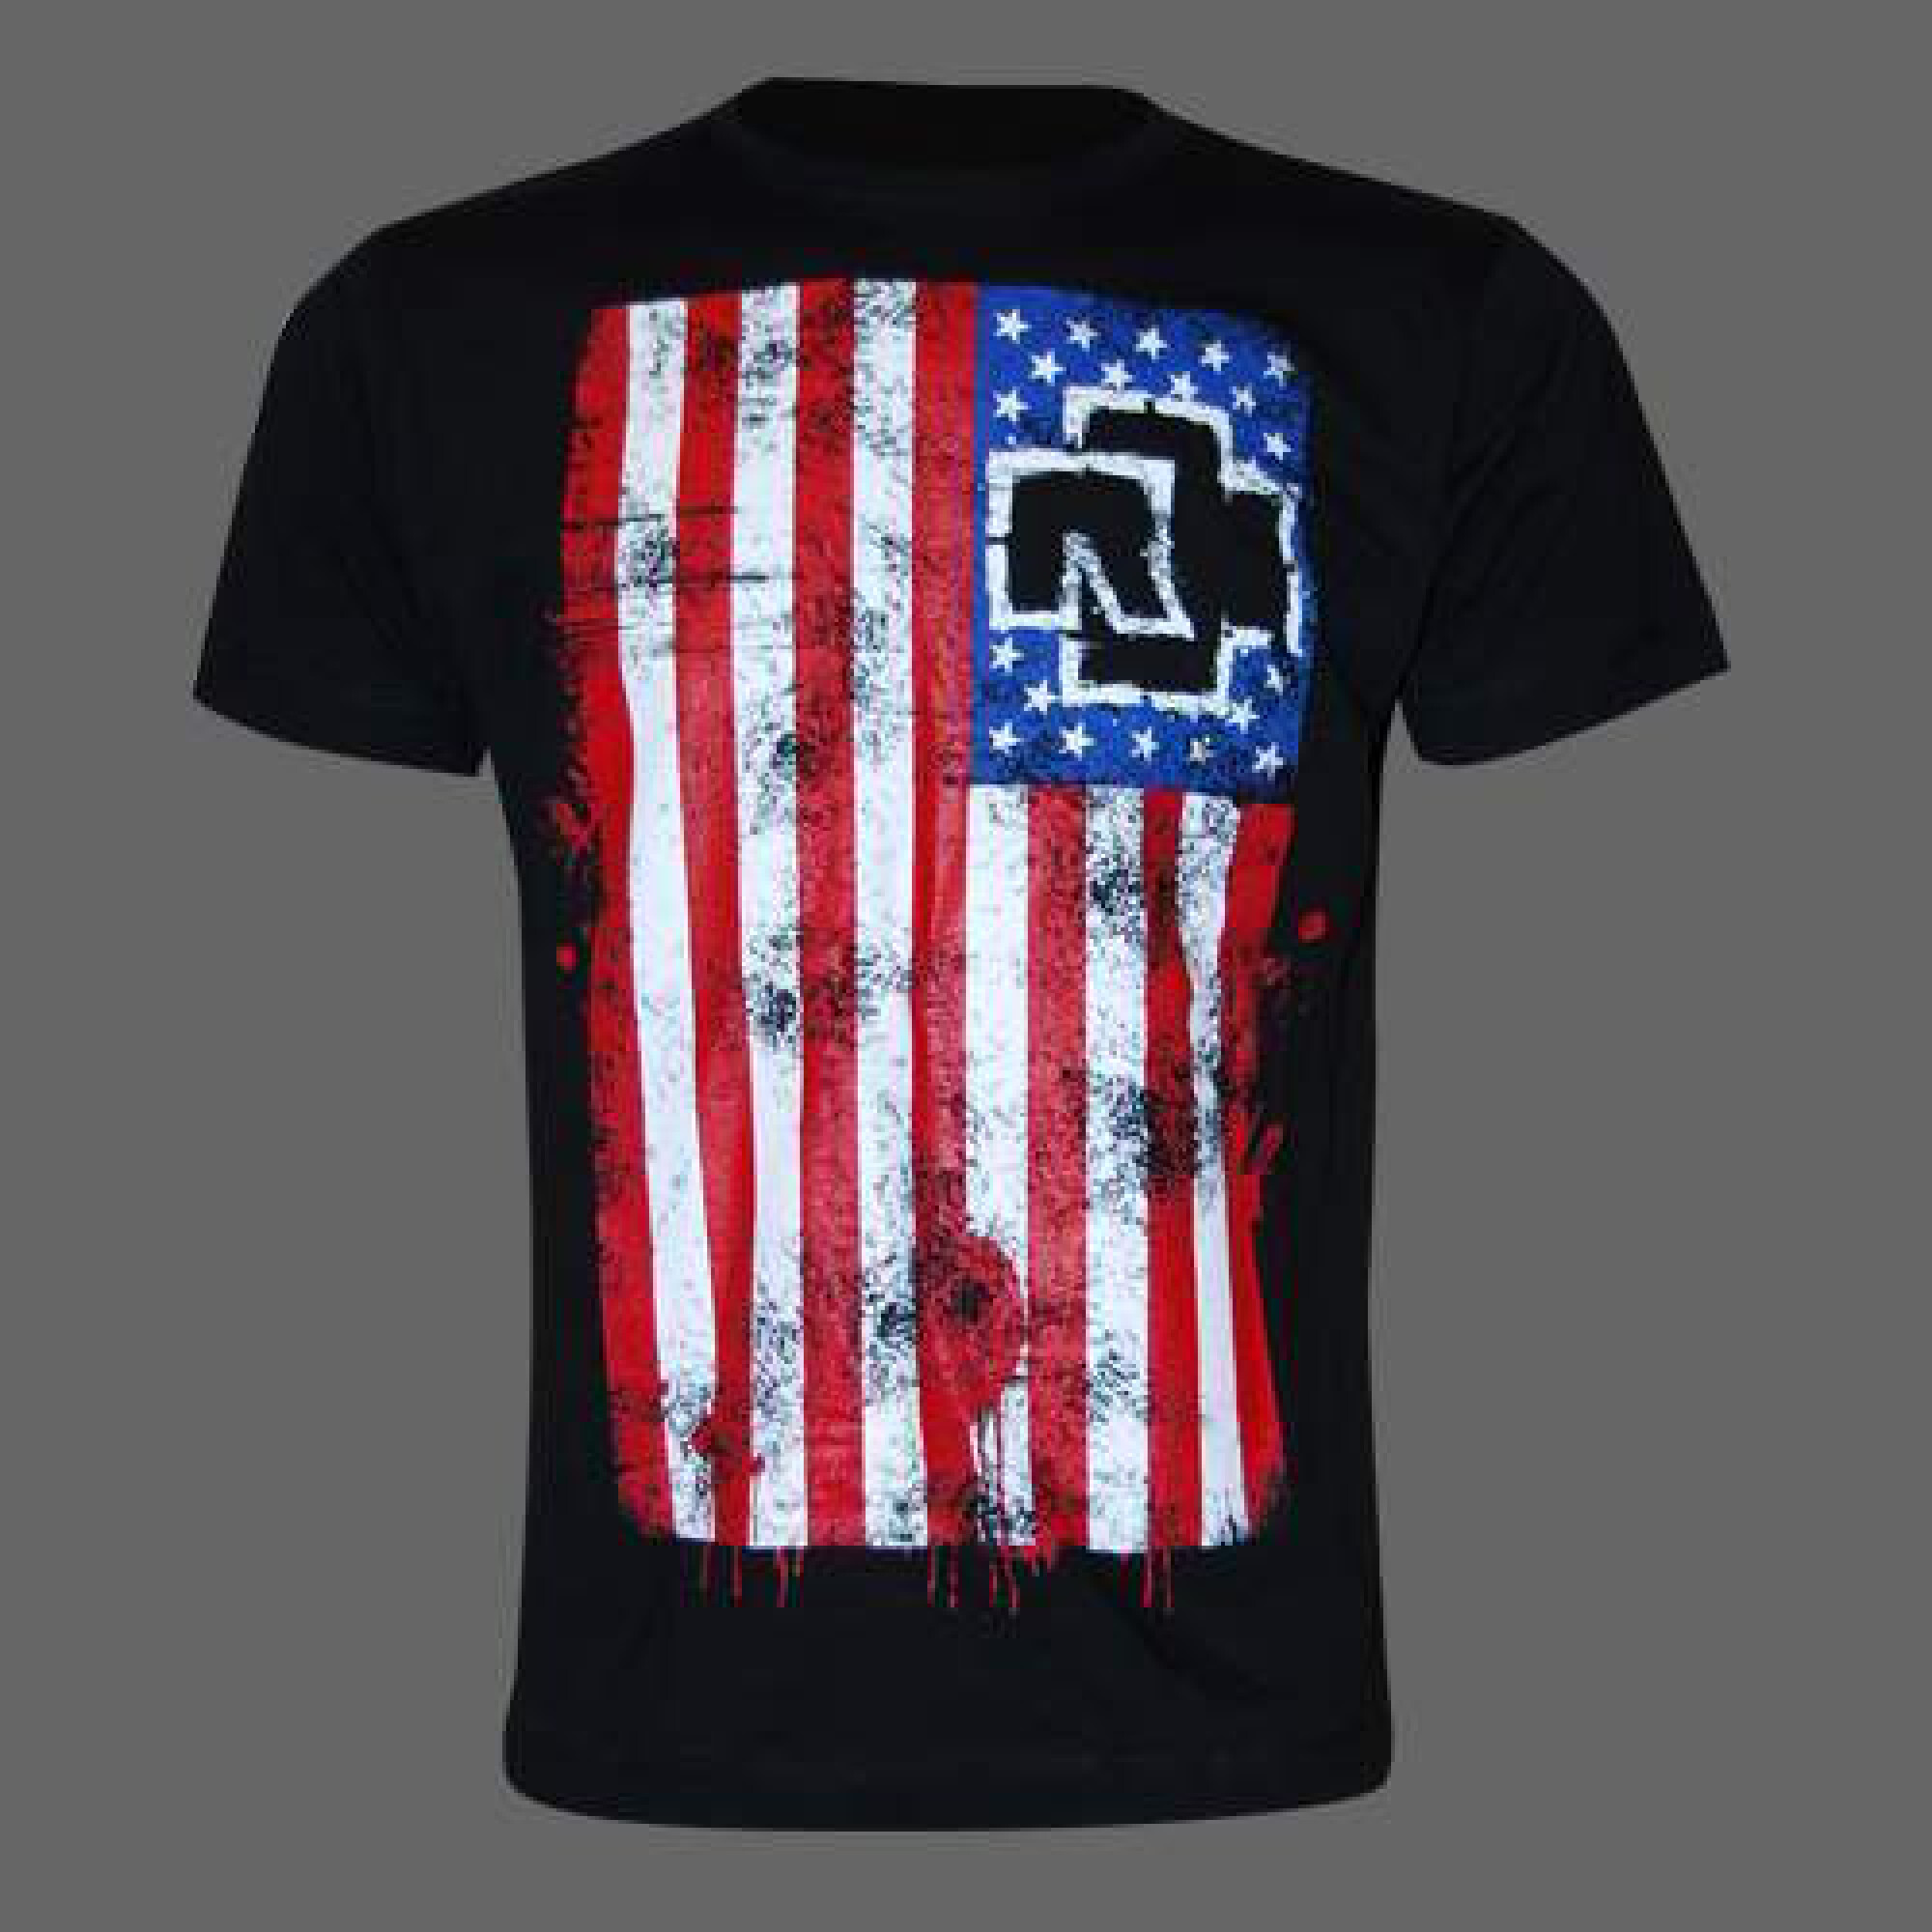 FREE shipping Rammstein Signatures American Flag Vintage shirt